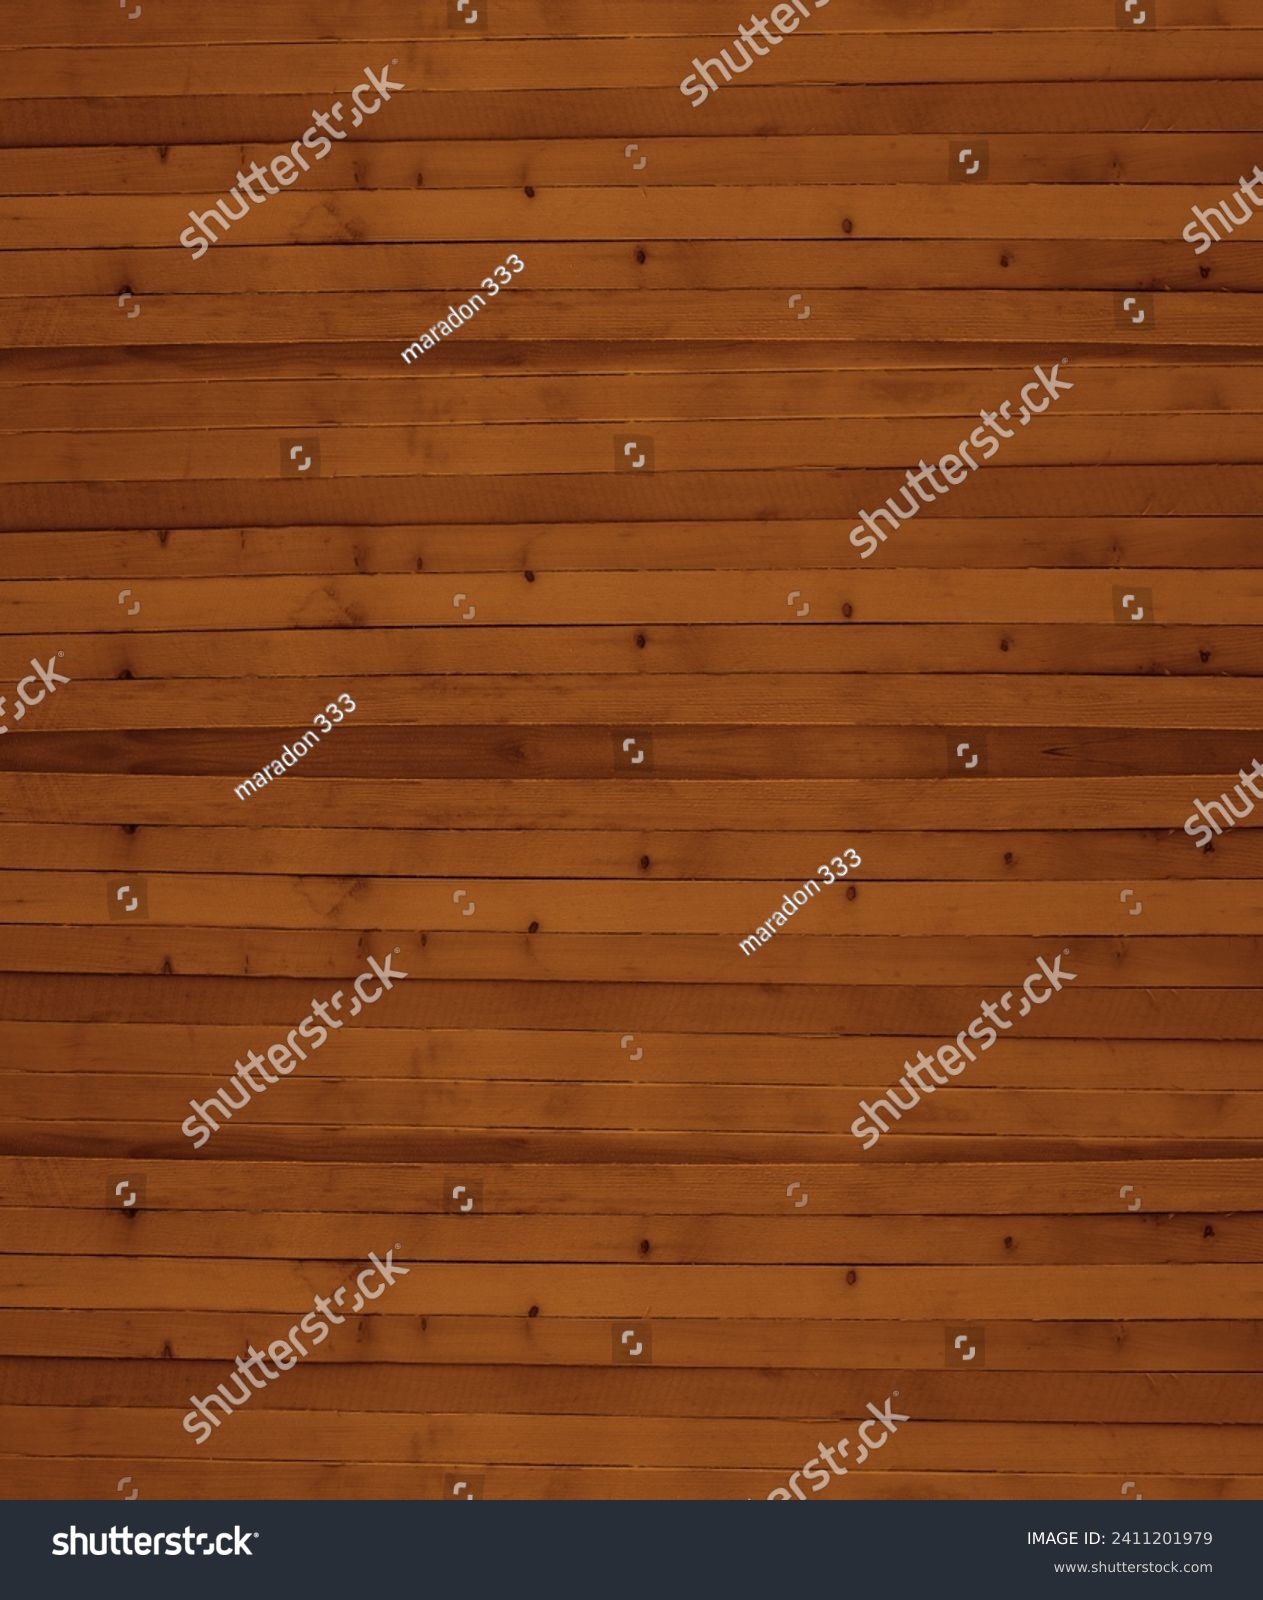 Wooden boards, lumber, industrial wood, timber. Pine wood timber. Rough spruce and pine lumber pile at a sawmill. Pile of wooden boards at lumber production factory. beams,  plank background. material #2411201979